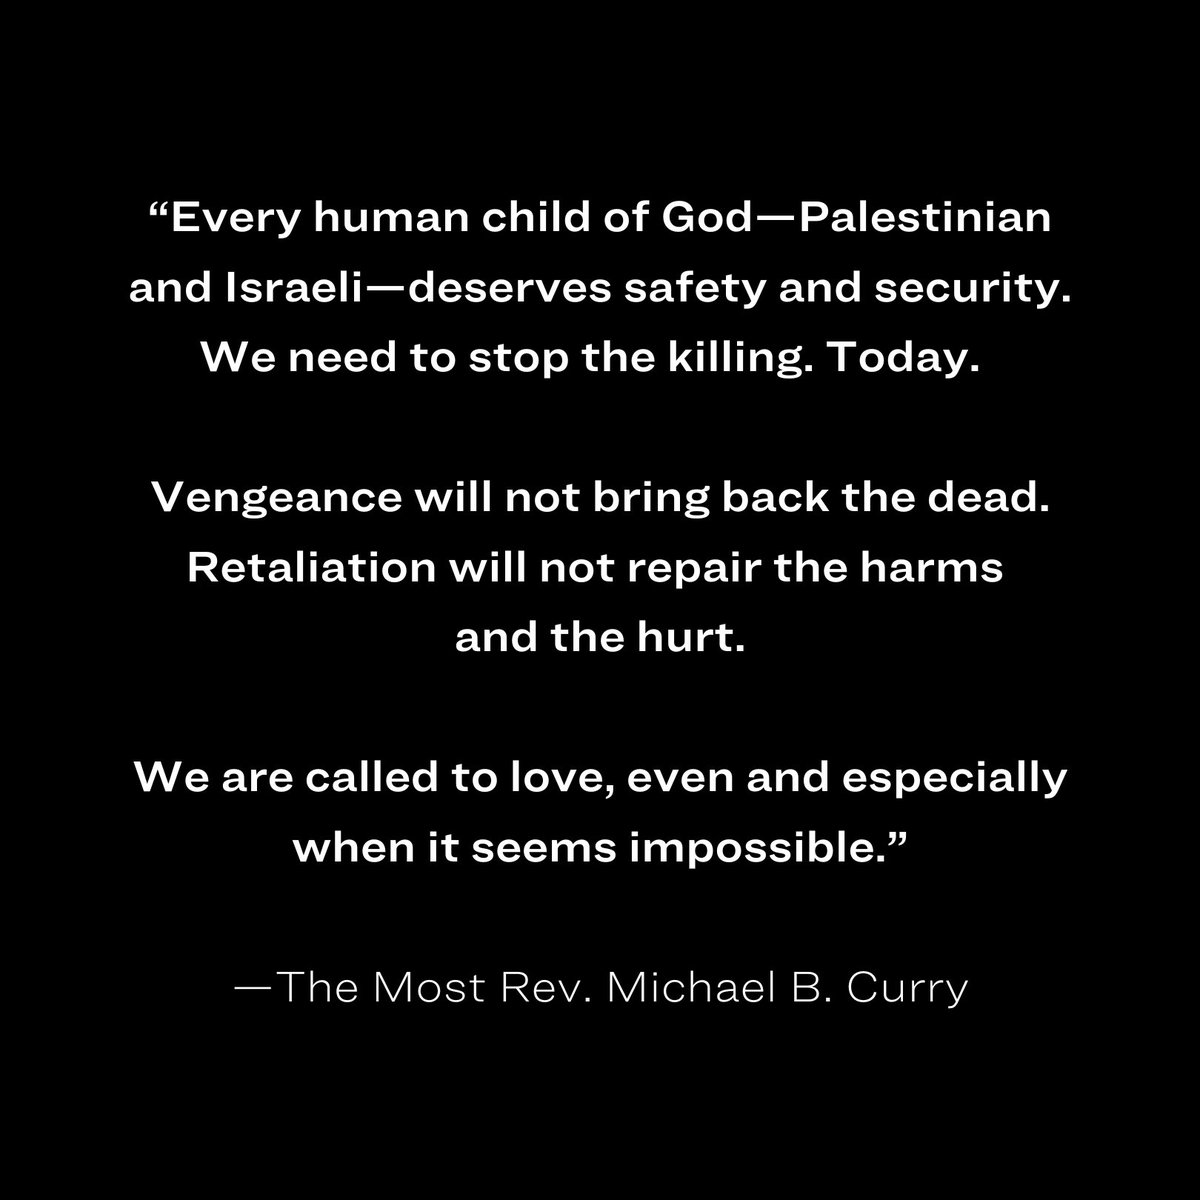 “The violence is horrific, and the geopolitics are complex, but my call to love is simple: Stop the killing.' @PB_Curry has called upon U.S. leadership “to be unequivocal that we need to stop the killing” in the Israel-Hamas war. Read his full statement: ow.ly/7p6650Q5Inb